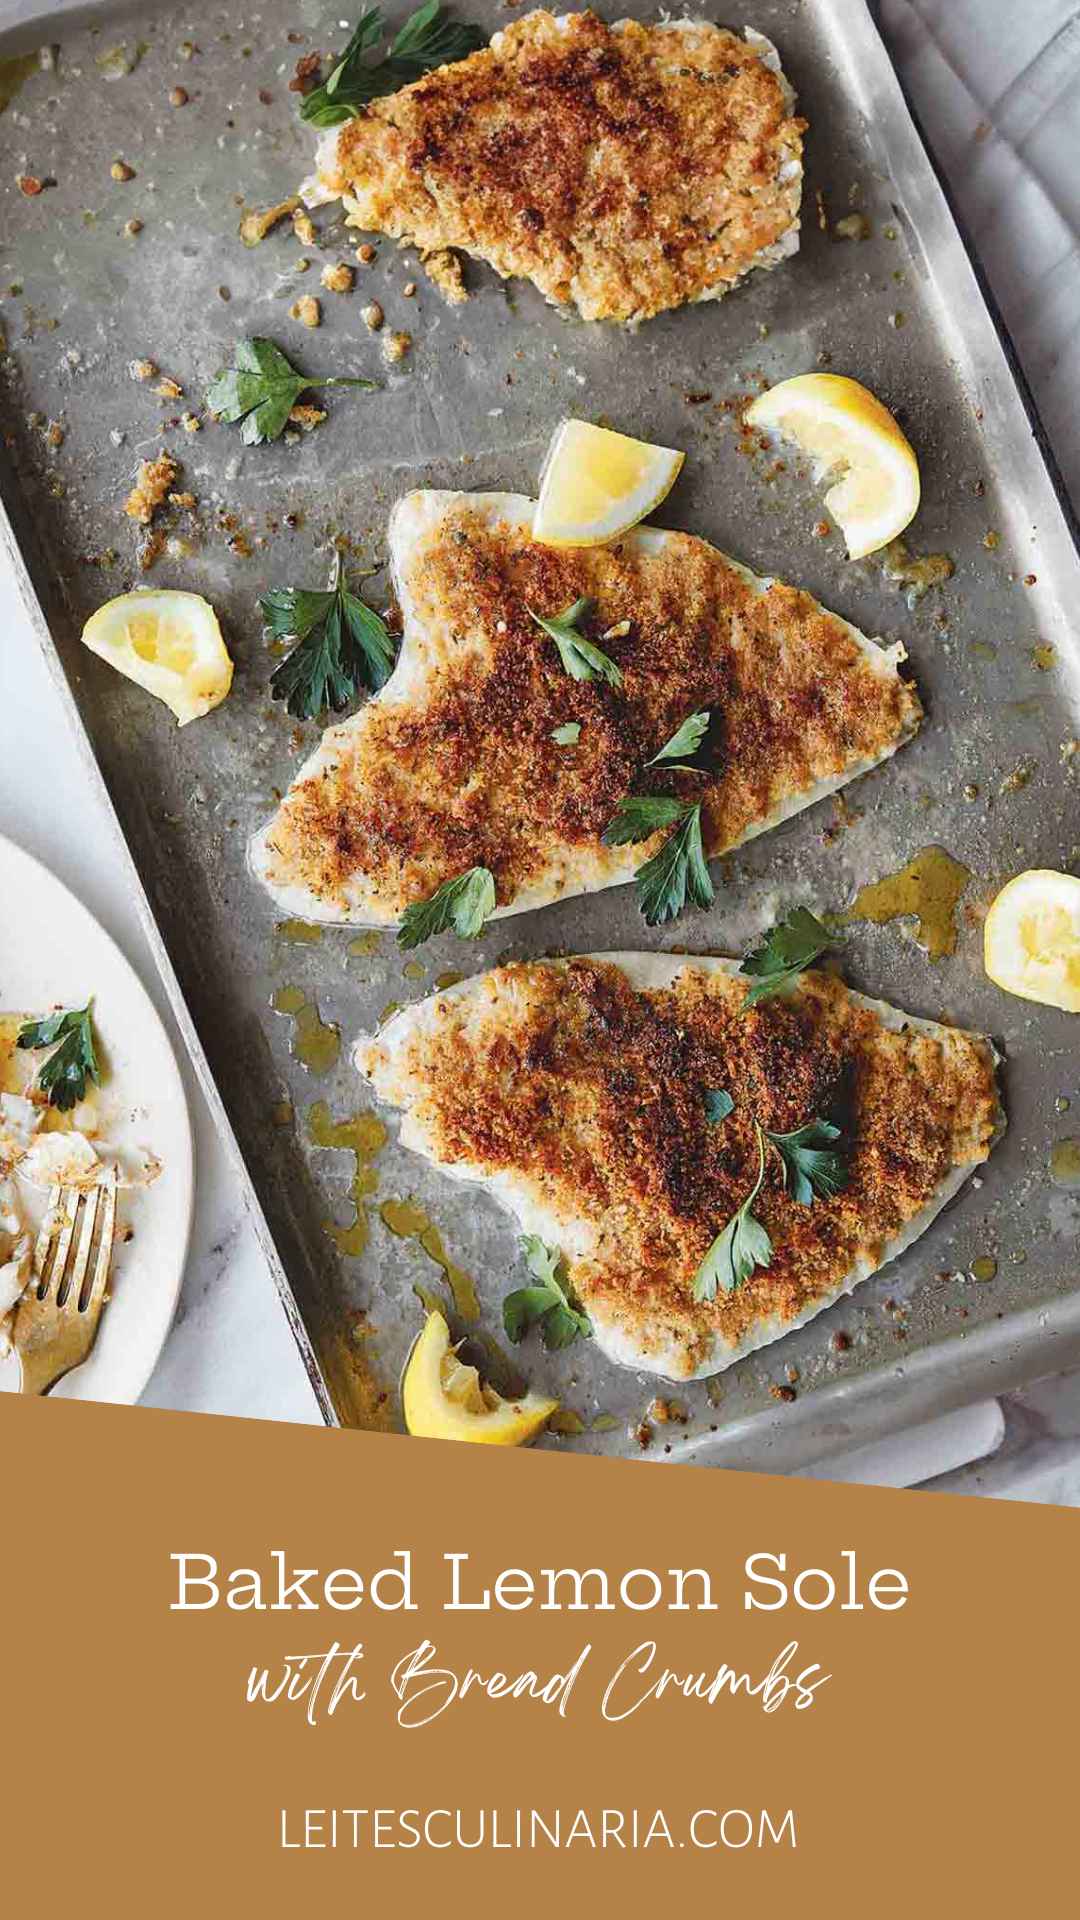 Three pieces of baked sole with bread crumbs and lemon on a rimmed baking sheet.